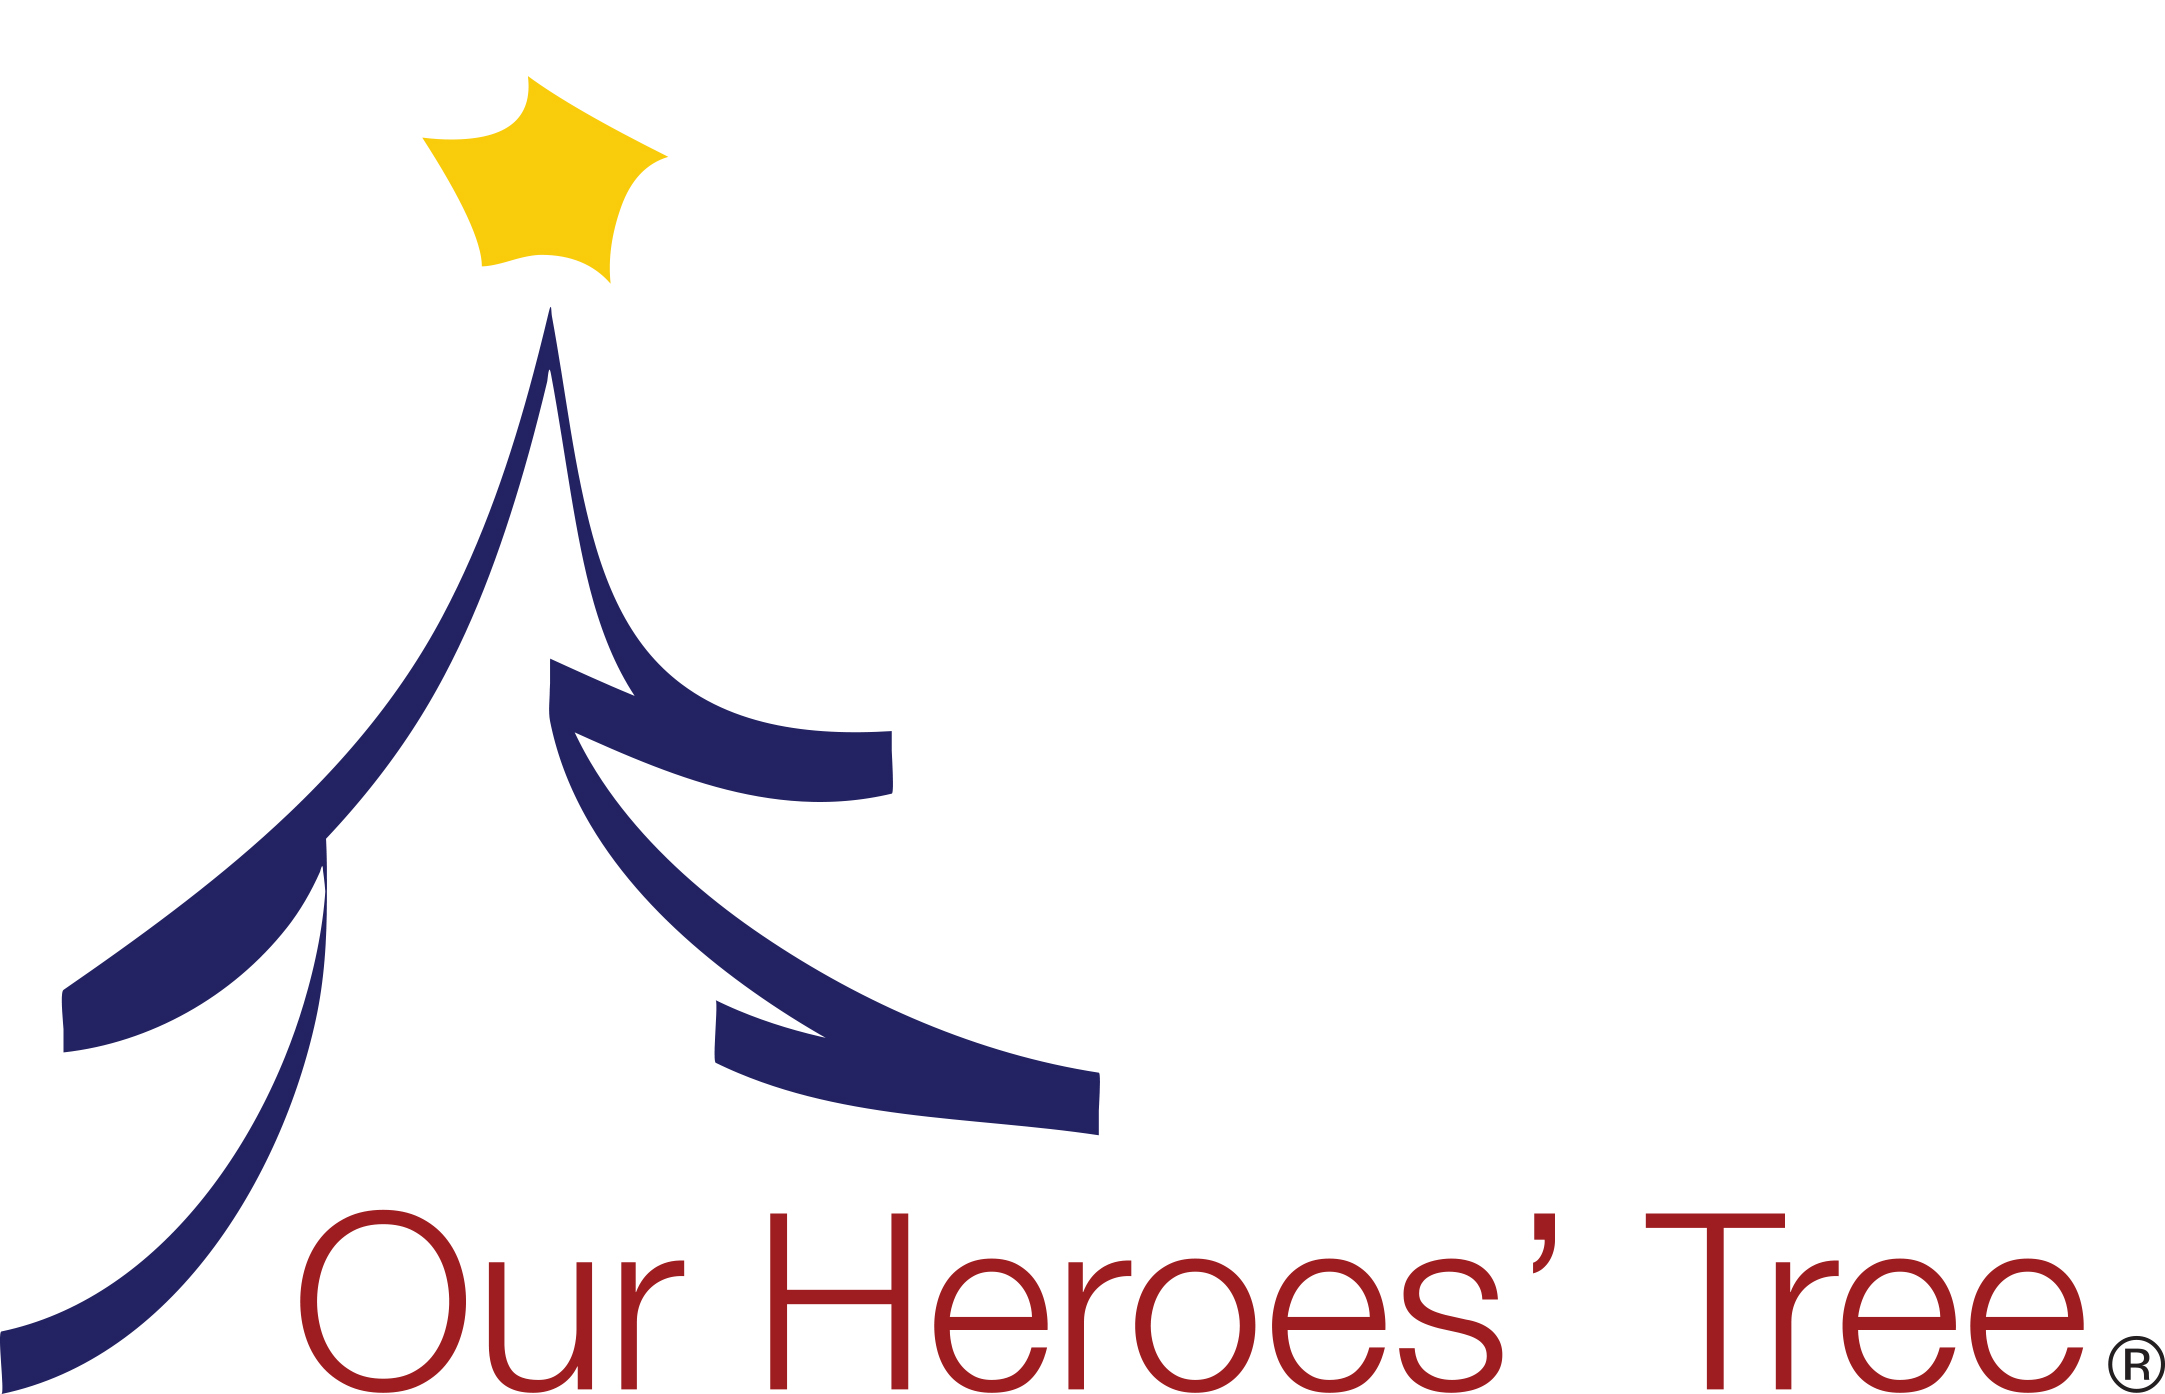 Our Heroes Tree logo